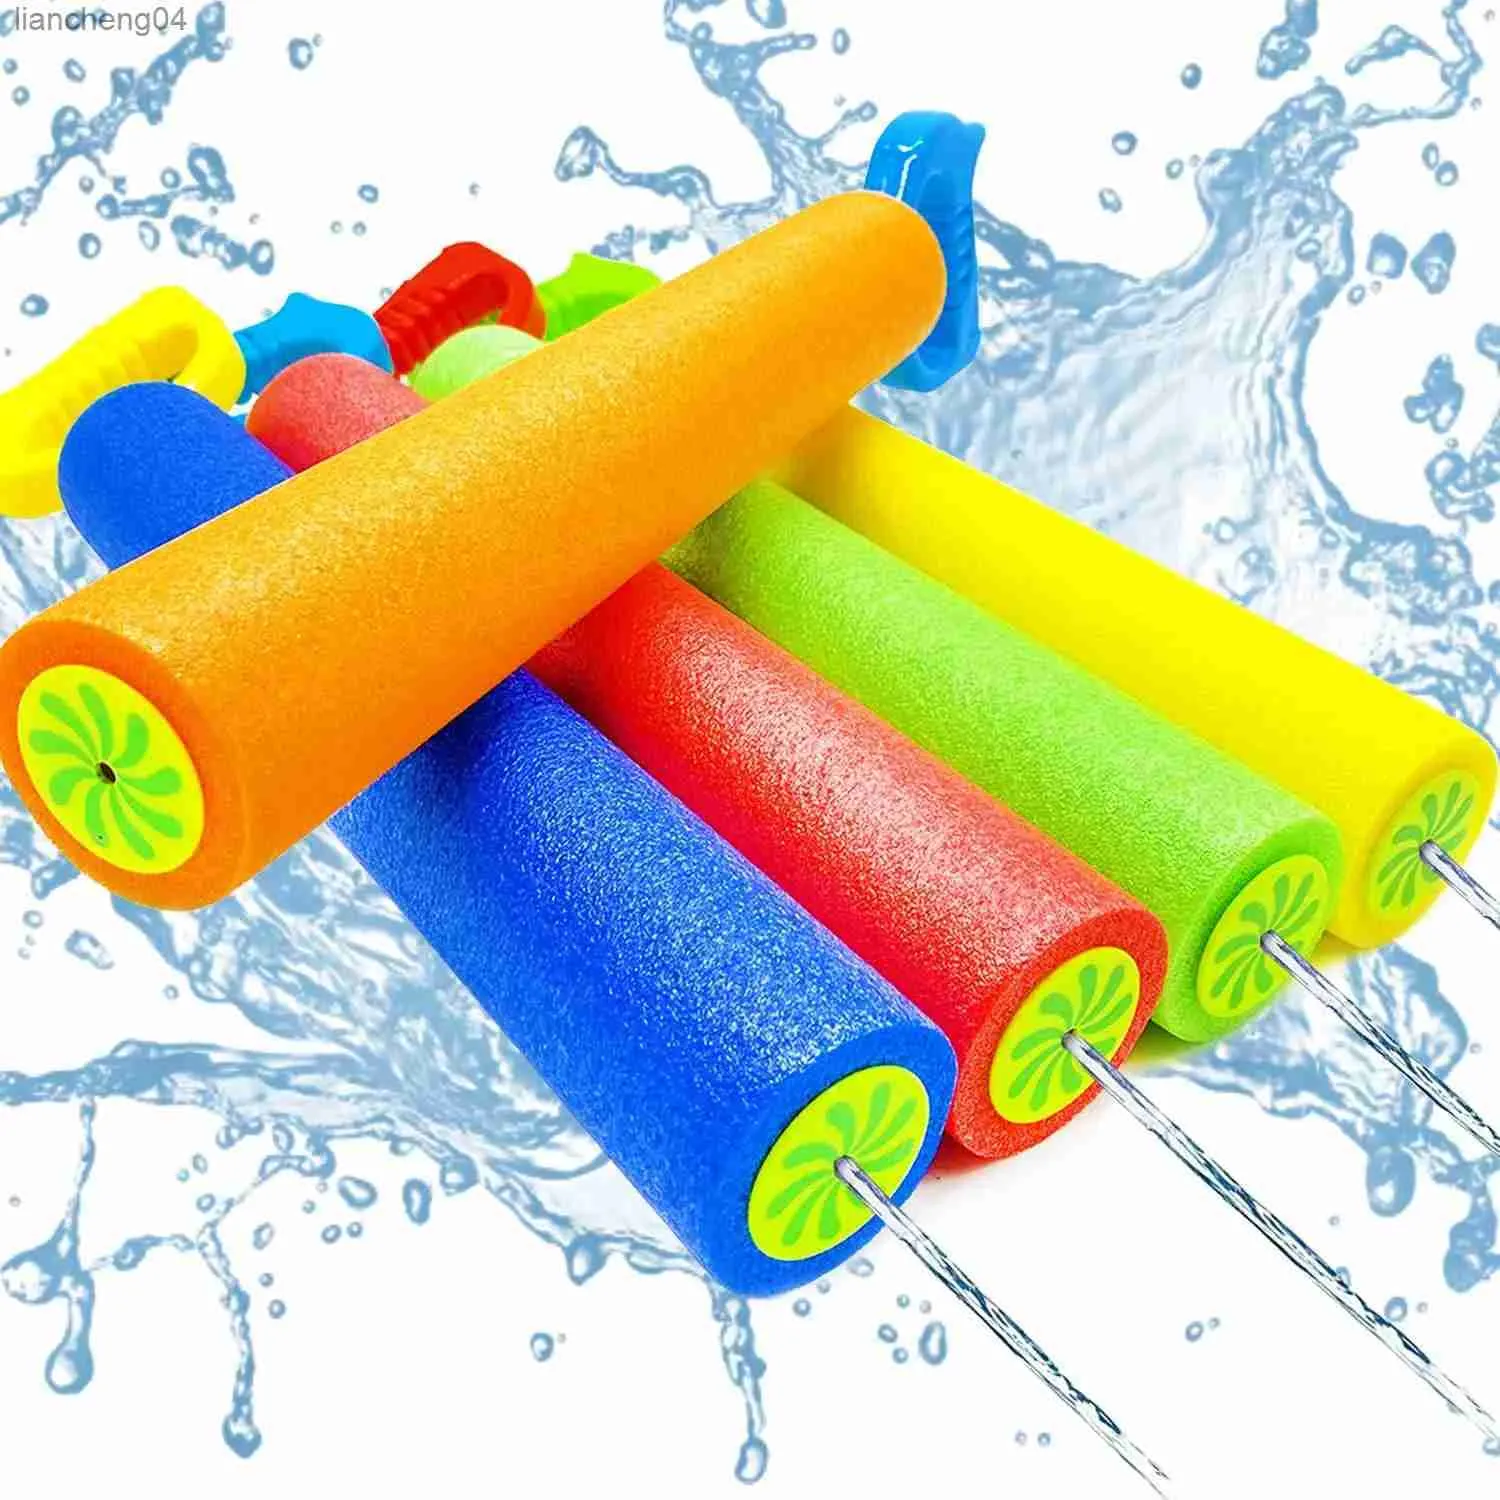 Sand Play Water Fun Foam Water Shooter Water Gun Blaster Pool Toys For Kids Adults Swimming Beach Summer Outdoor Water Fighting Game Aktiviteter